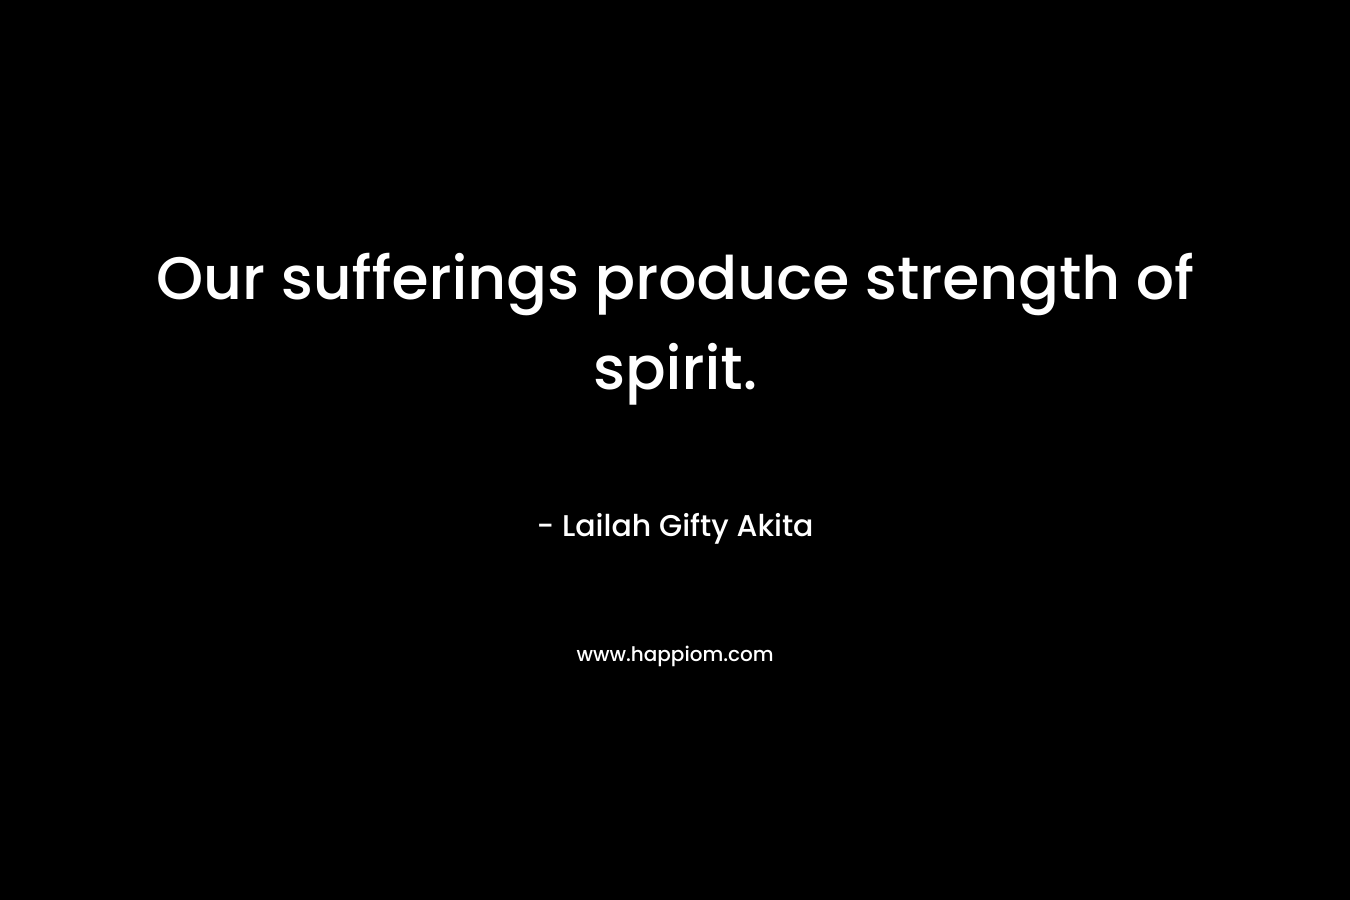 Our sufferings produce strength of spirit.